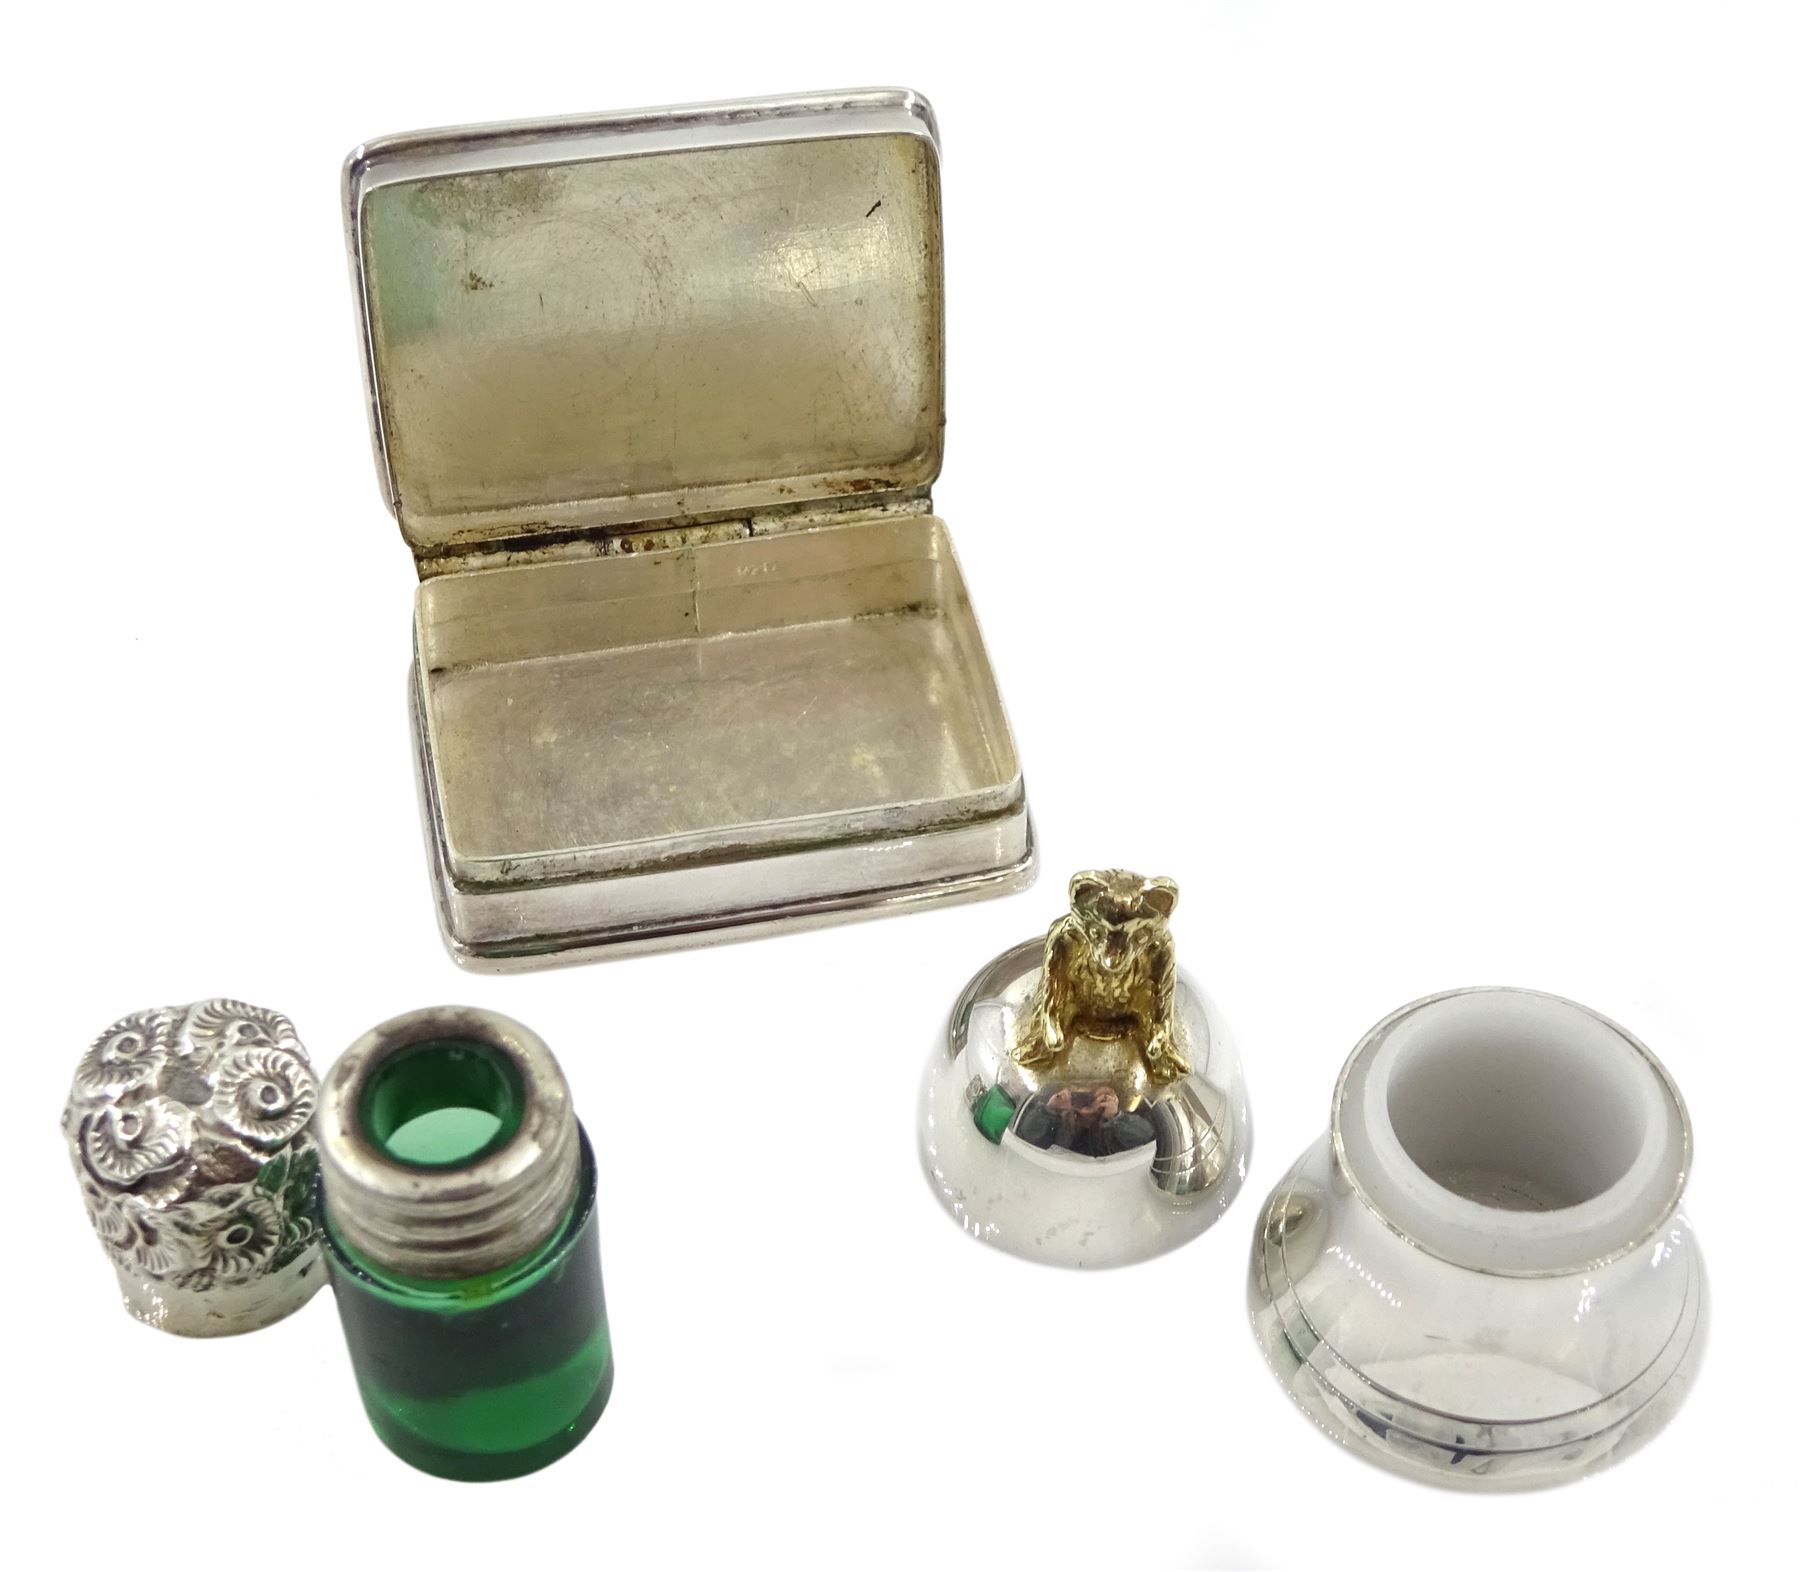 Silver emerald green glass scent bottle with silver lid by Cornelius Desormeaux Saunders & James Fra - Image 4 of 4